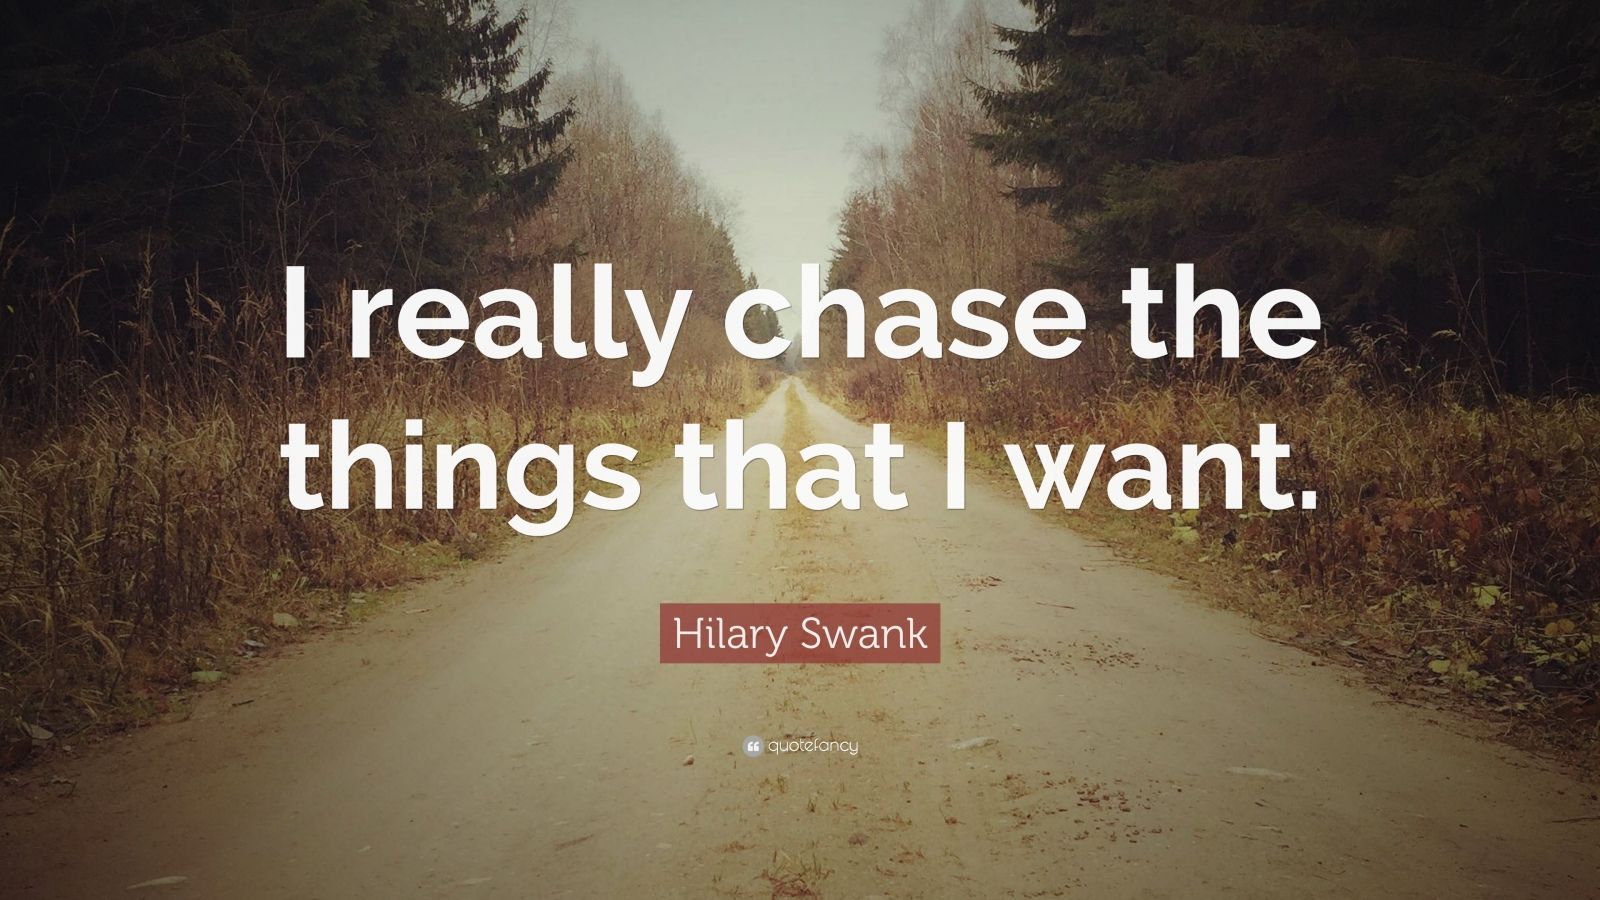 Hilary Swank Quote “i Really Chase The Things That I Want”